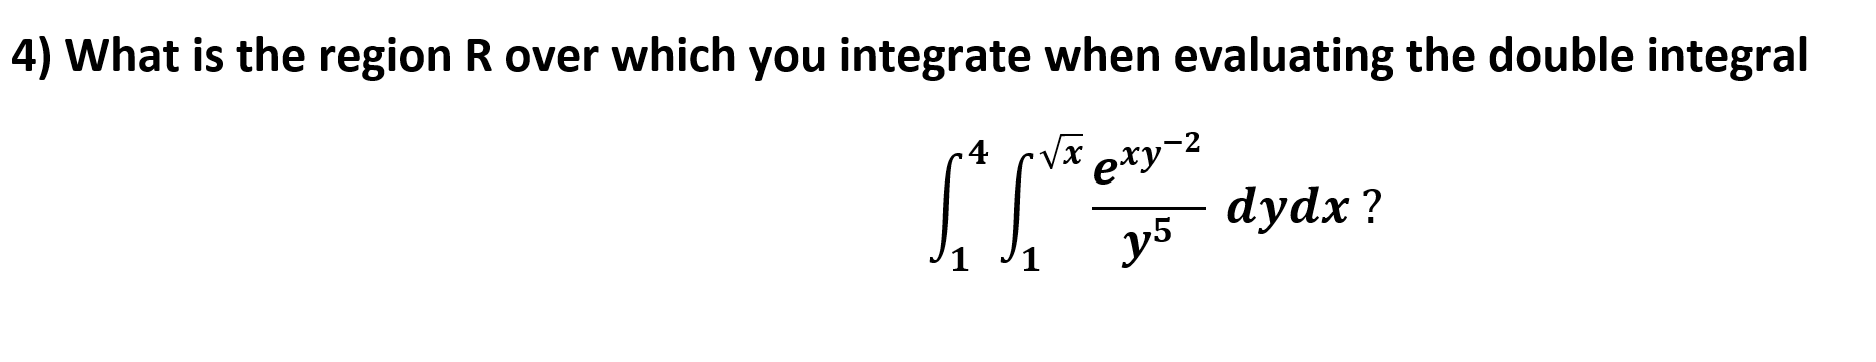 4) What is the region R over which you integrate when evaluating the double integral
.4 Vxexy
dydx?
